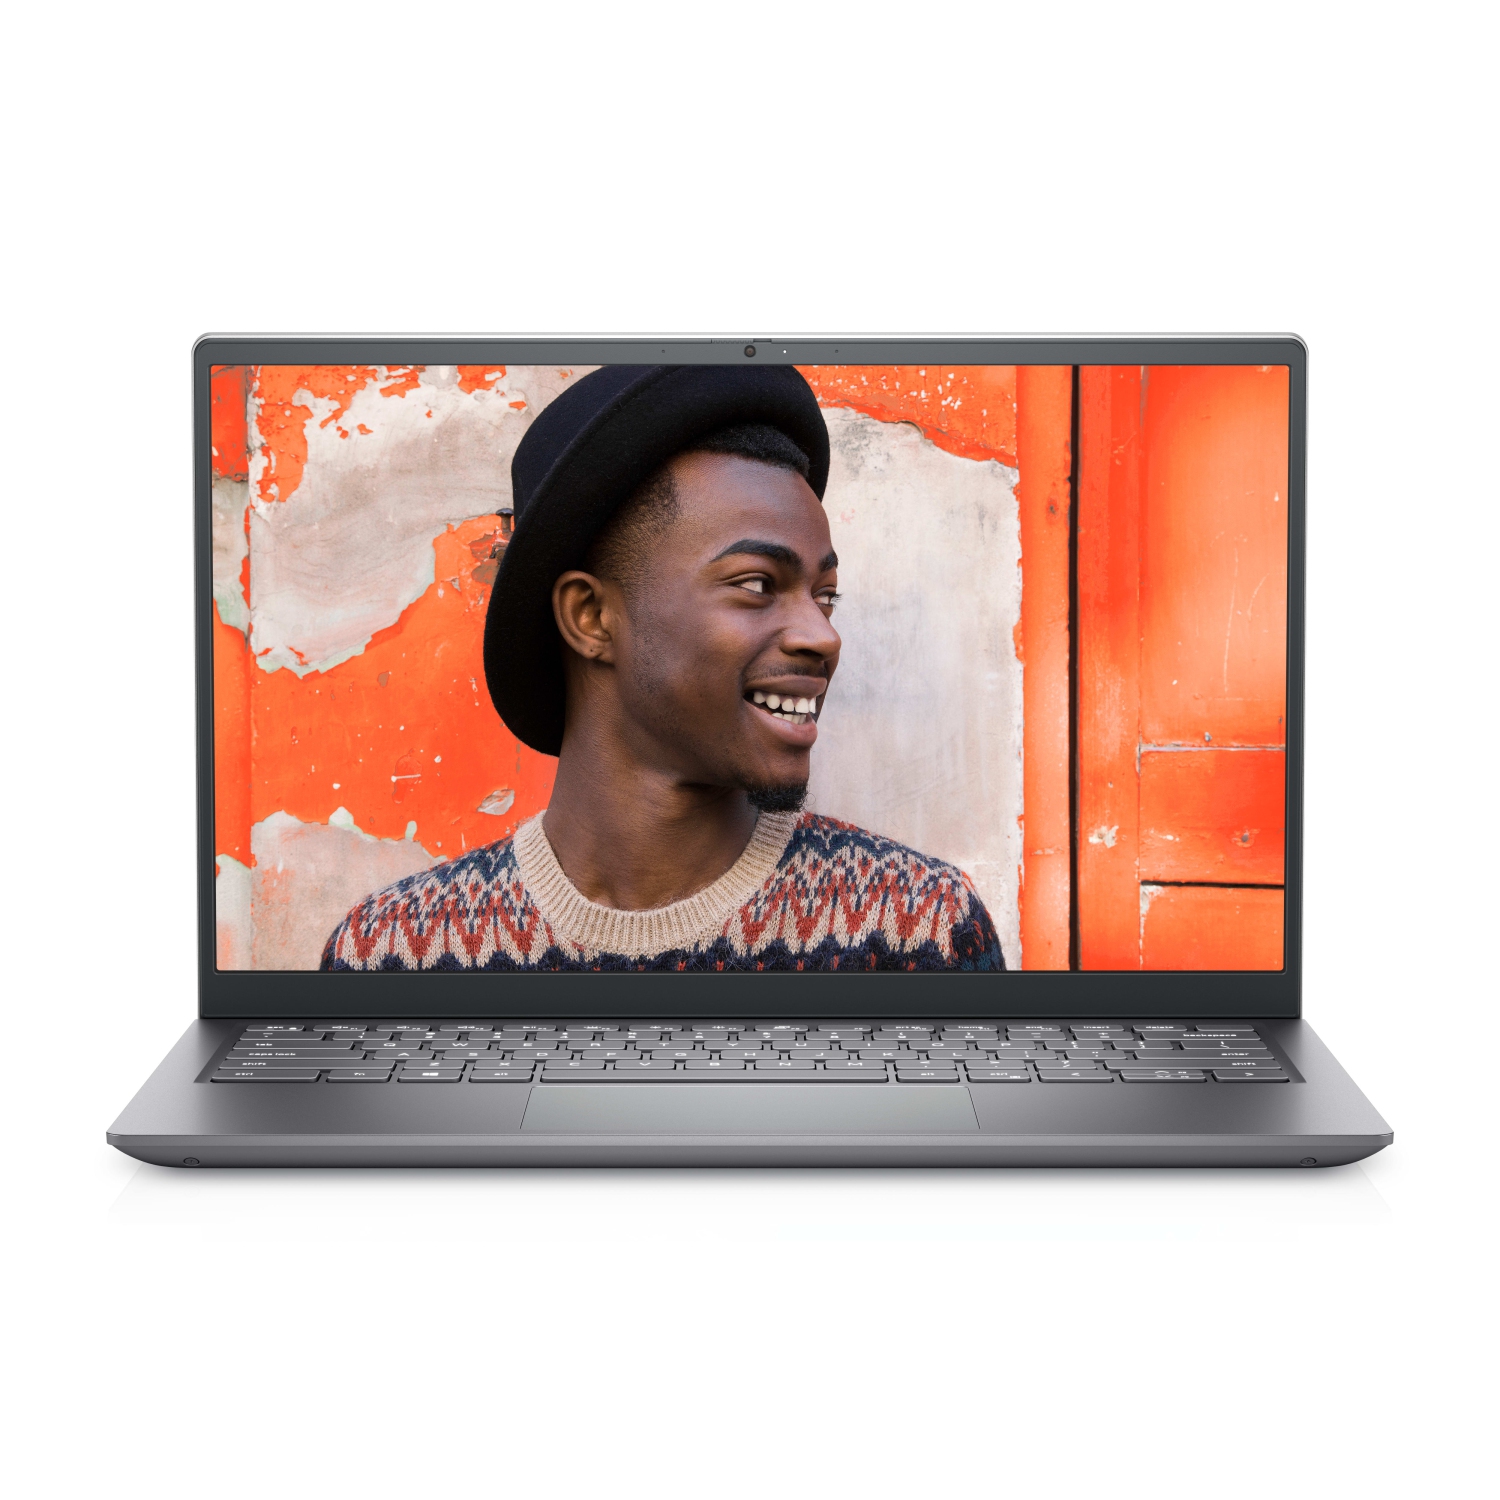 Refurbished (Excellent) – Dell Inspiron 5410 Laptop (2021) | 14" FHD | Core i7 - 1TB SSD - 64GB RAM | 4 Cores @ 4.8 GHz - 11th Gen CPU